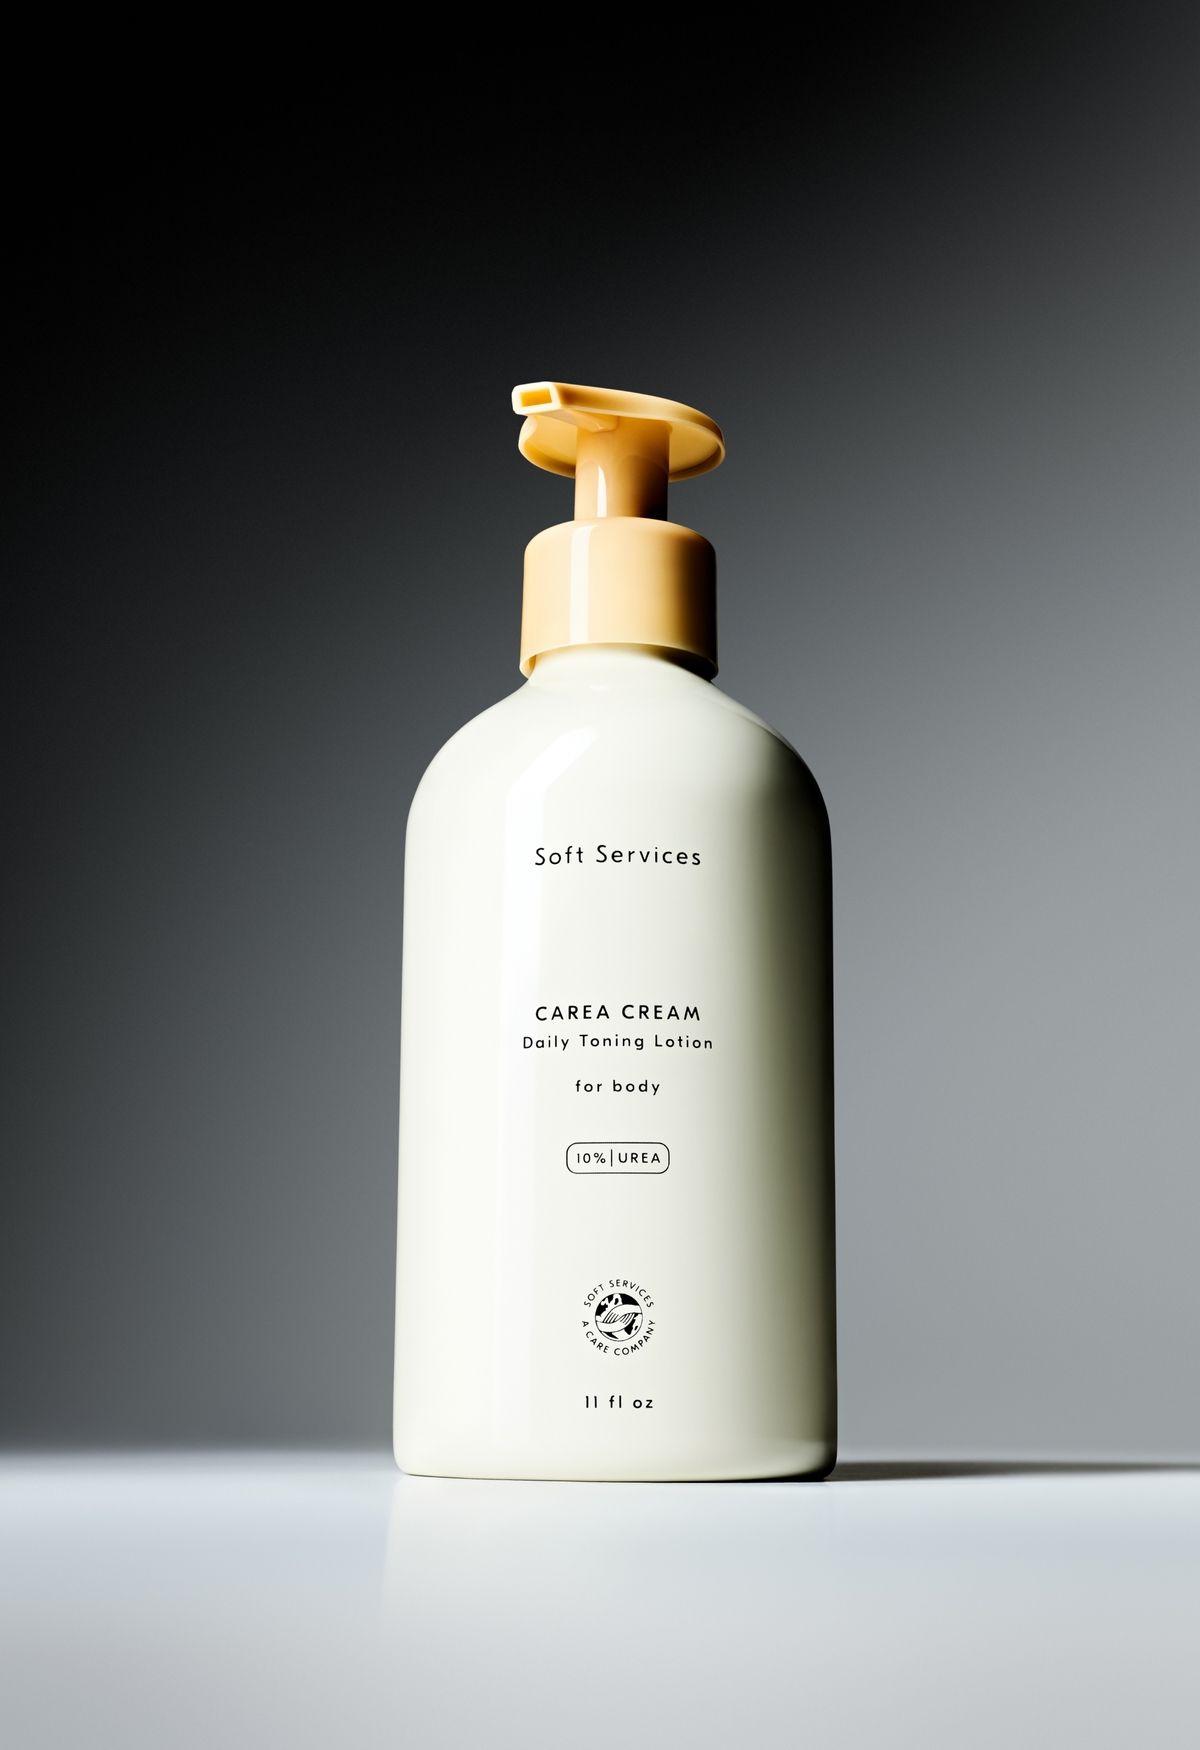 Carea Cream | Daily Toning Lotion Body Lotion for Dry or Bumpy Skin | Soft | the body experts ™